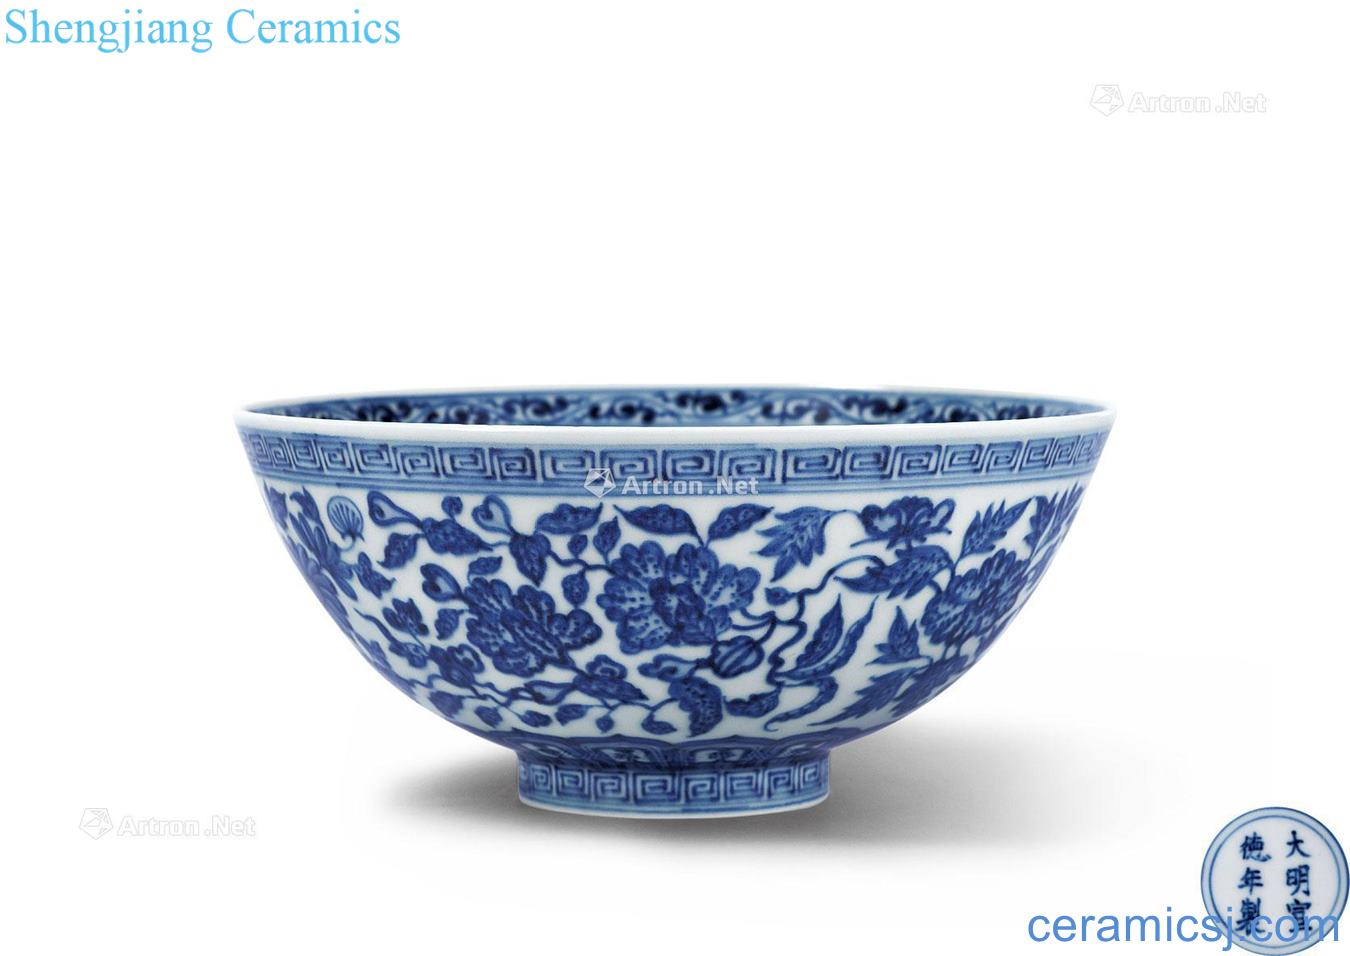 Qing imitation jintong of blue and white flower green-splashed bowls